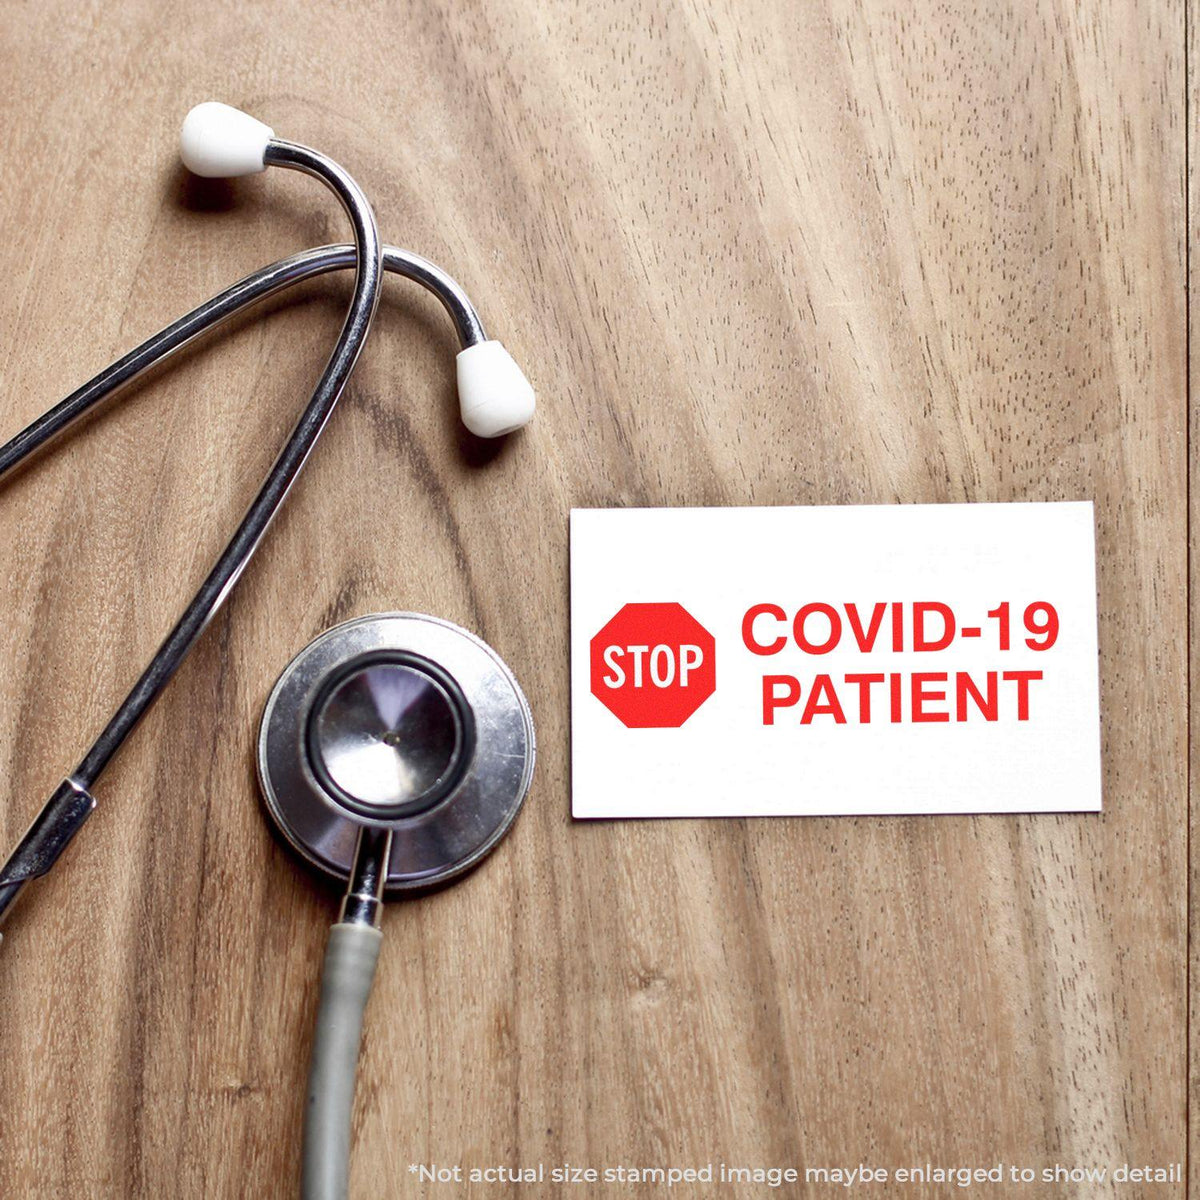 In Use Large Pre-Inked Stop Covid Patient Stamp Image